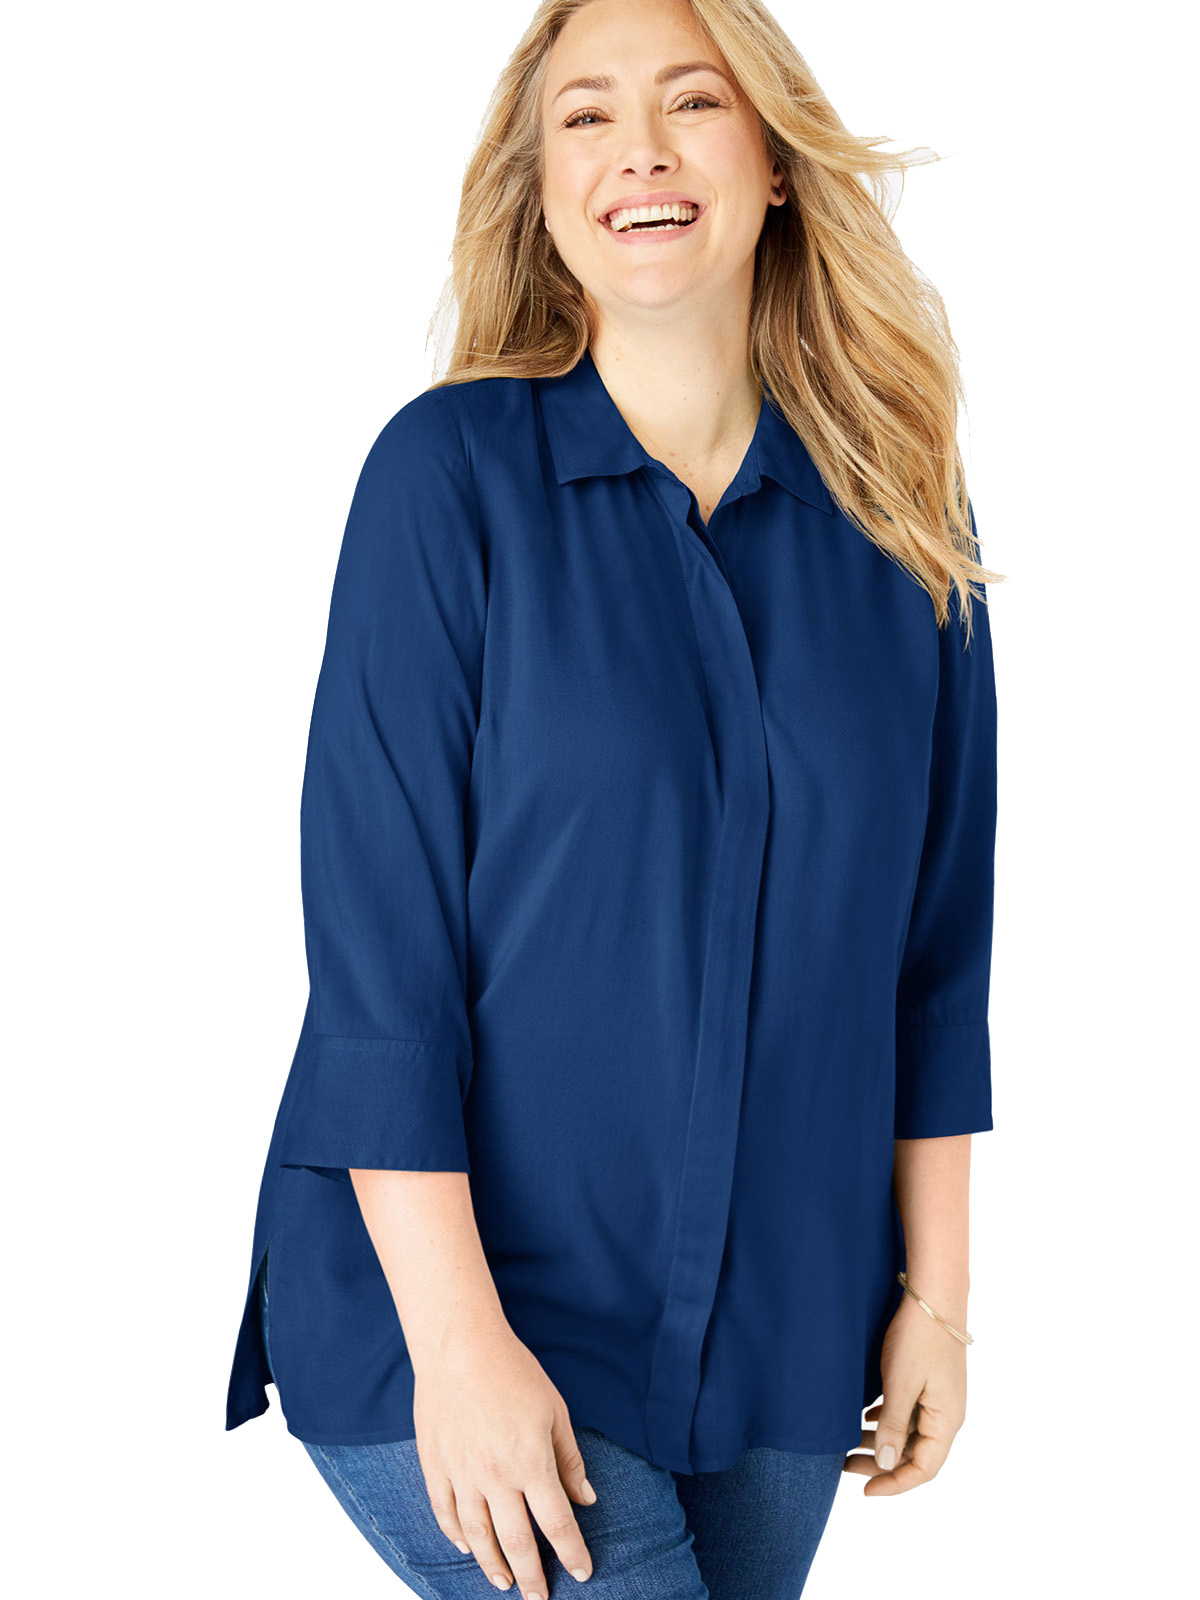 Woman Within - - Woman Within NAVY Elbow Sleeve A-Line Blouse - Plus ...